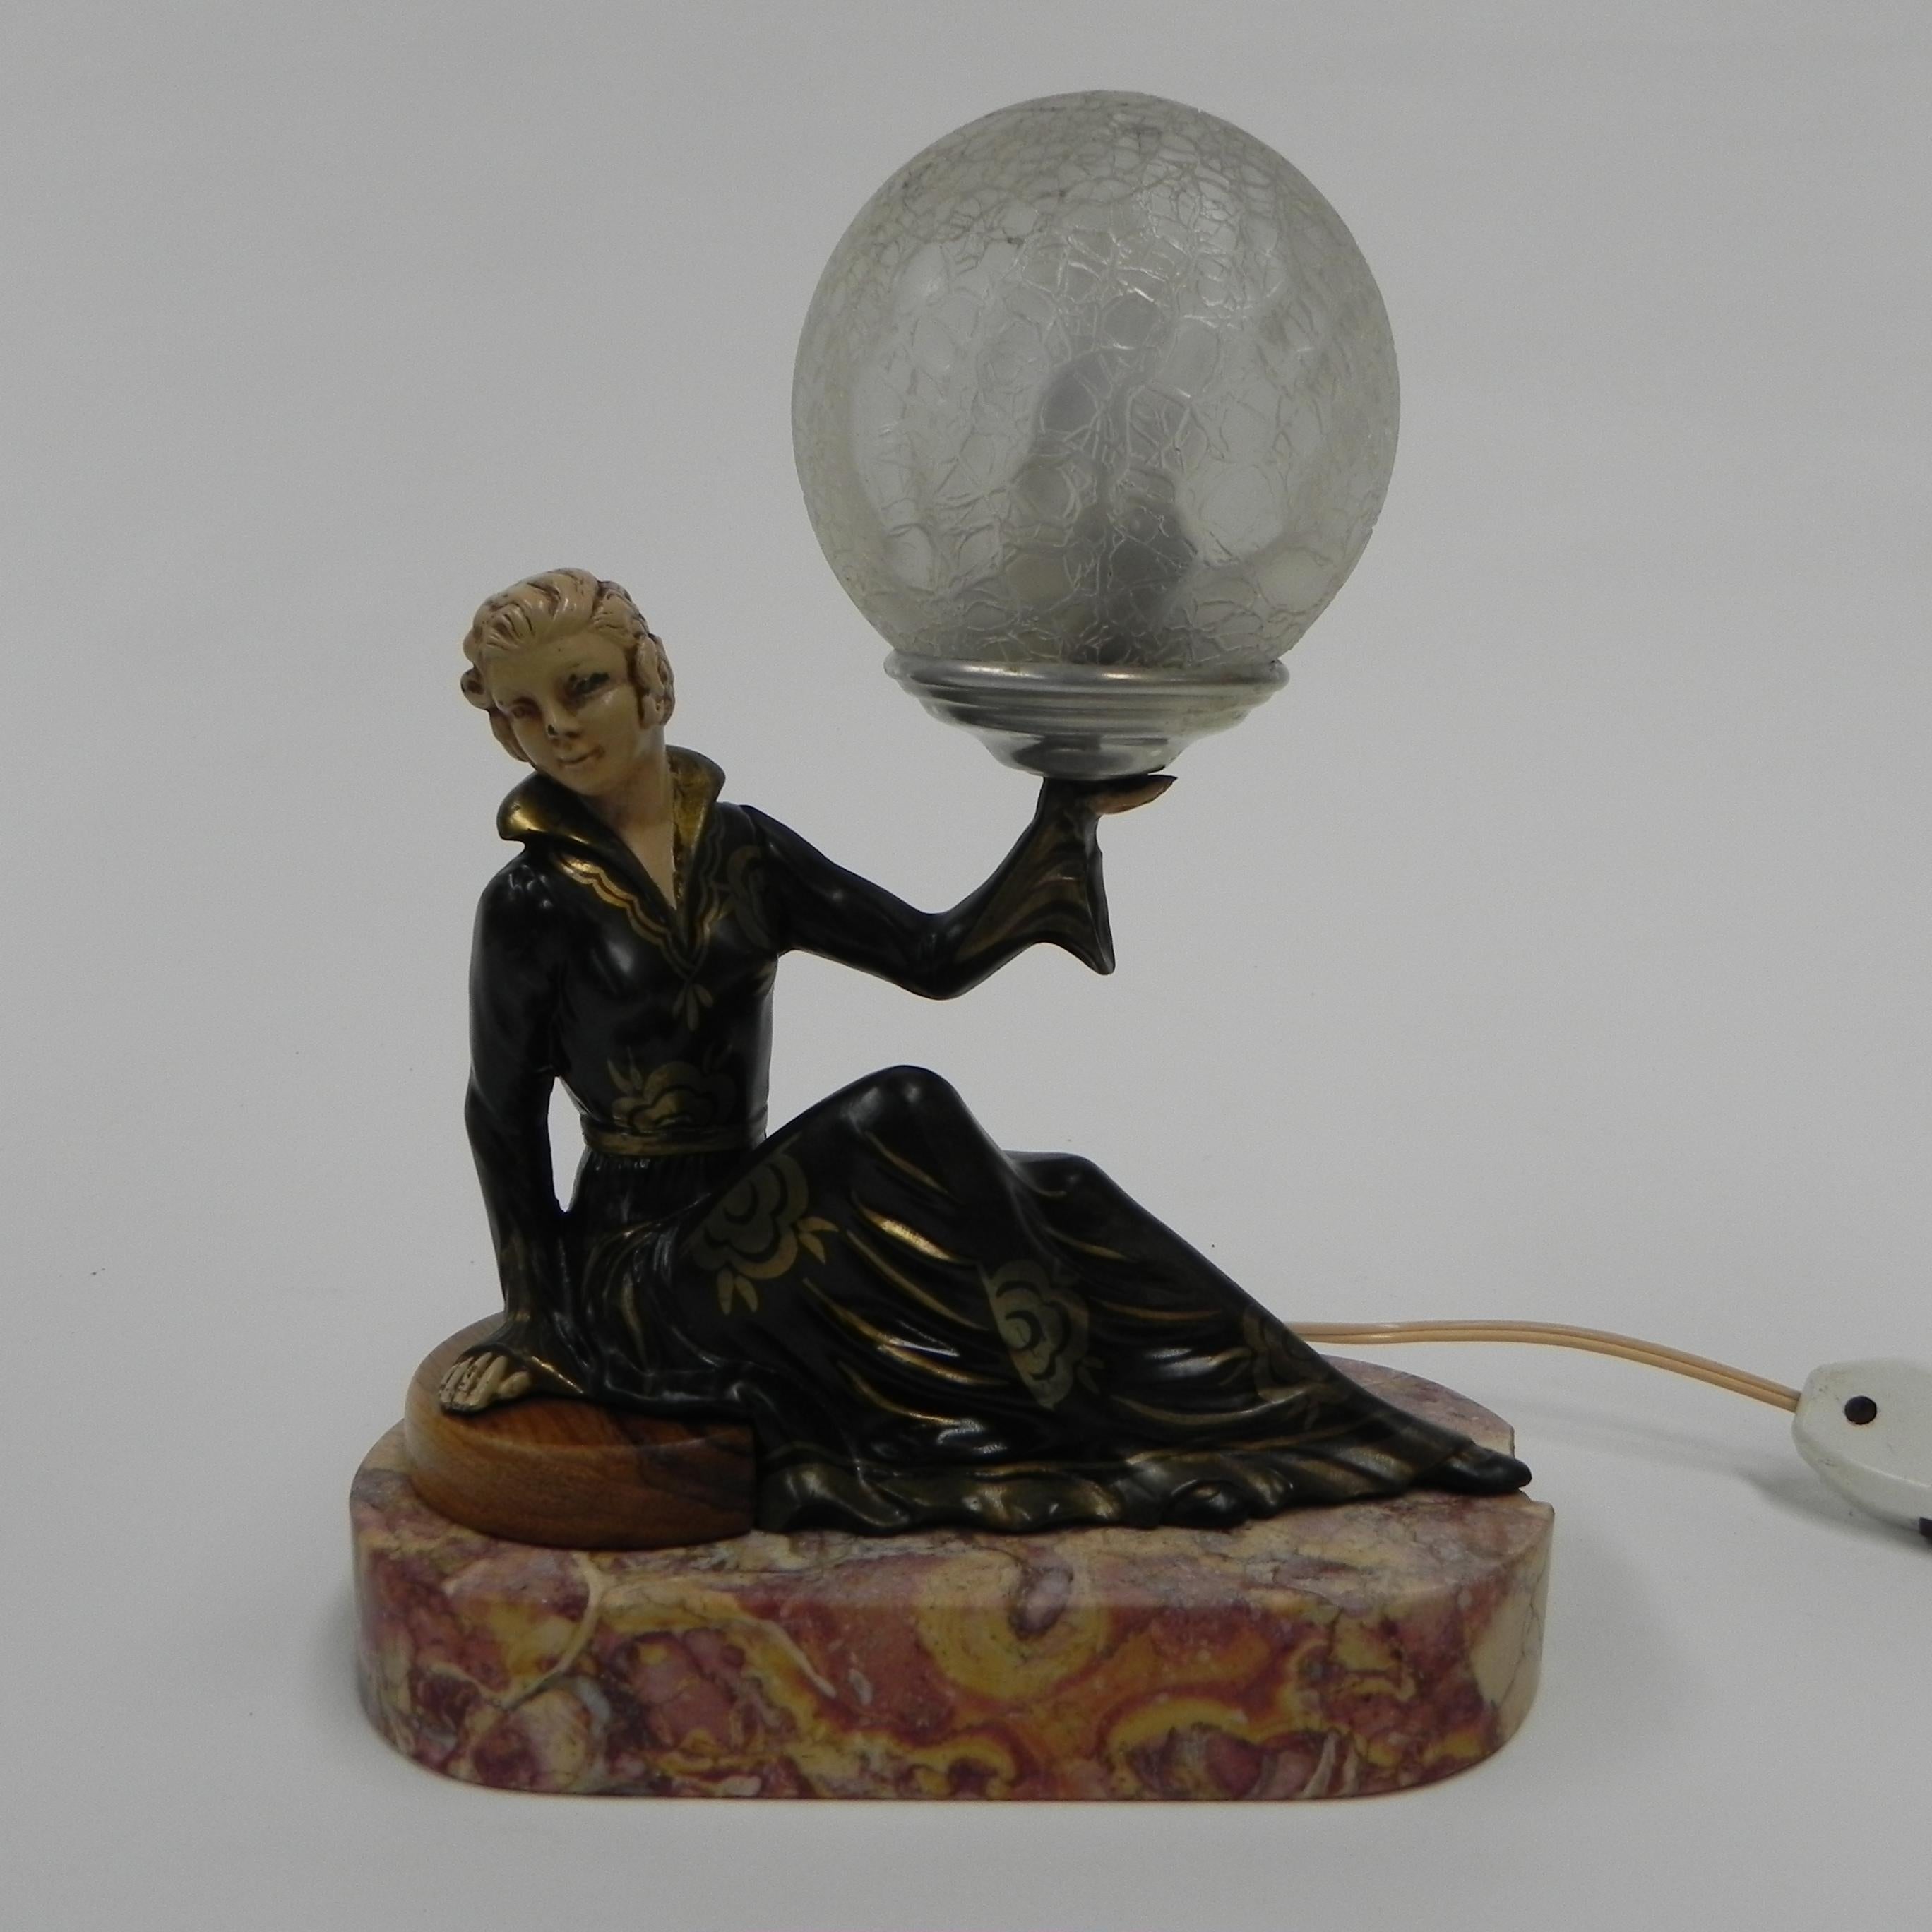 Height: 25 cm.
Width: 20 cm.
Depth: 10 cm.
The wooden disc where the woman is seated on
has been renewed by us.
The lamp is equipped with a bayonet
bulb holder with adapter to E14.
It can therefore simply be used for lamps
with a small screw